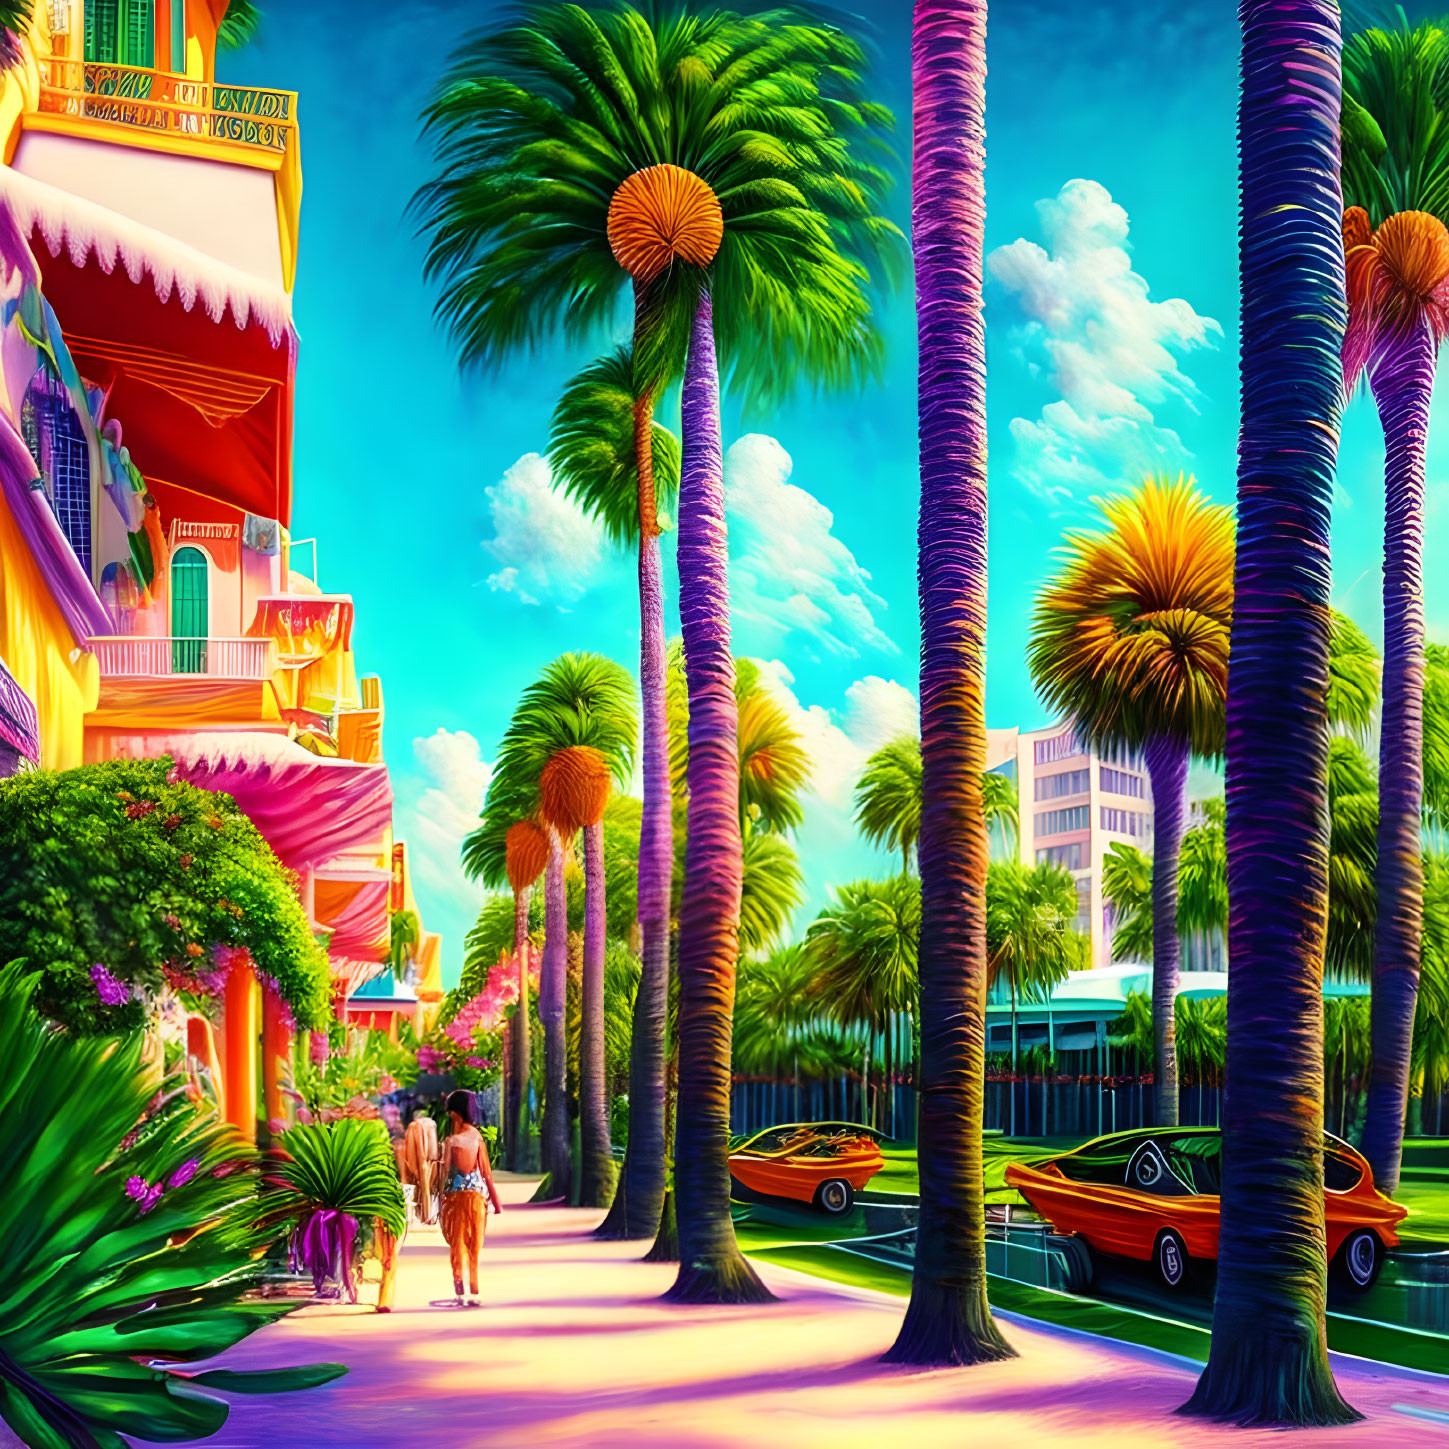 Colorful street scene with palm trees, buildings, cars, and couple walking hand in hand